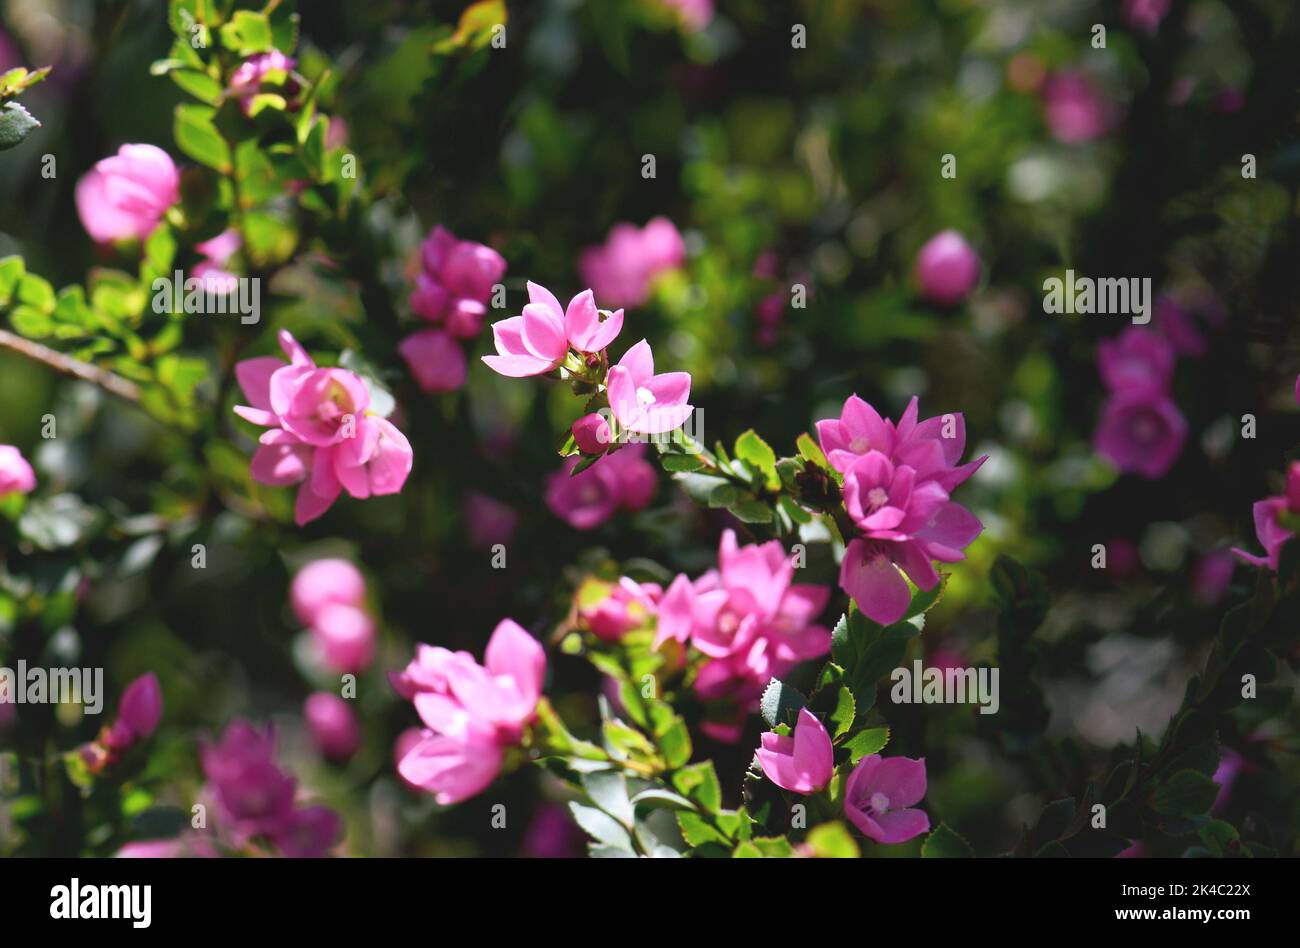 Close up of deep pink flowers of the Australian Native Rose, Boronia serrulata, family Rutaceae growing in sclerophyll forest understorey in full sun Stock Photo